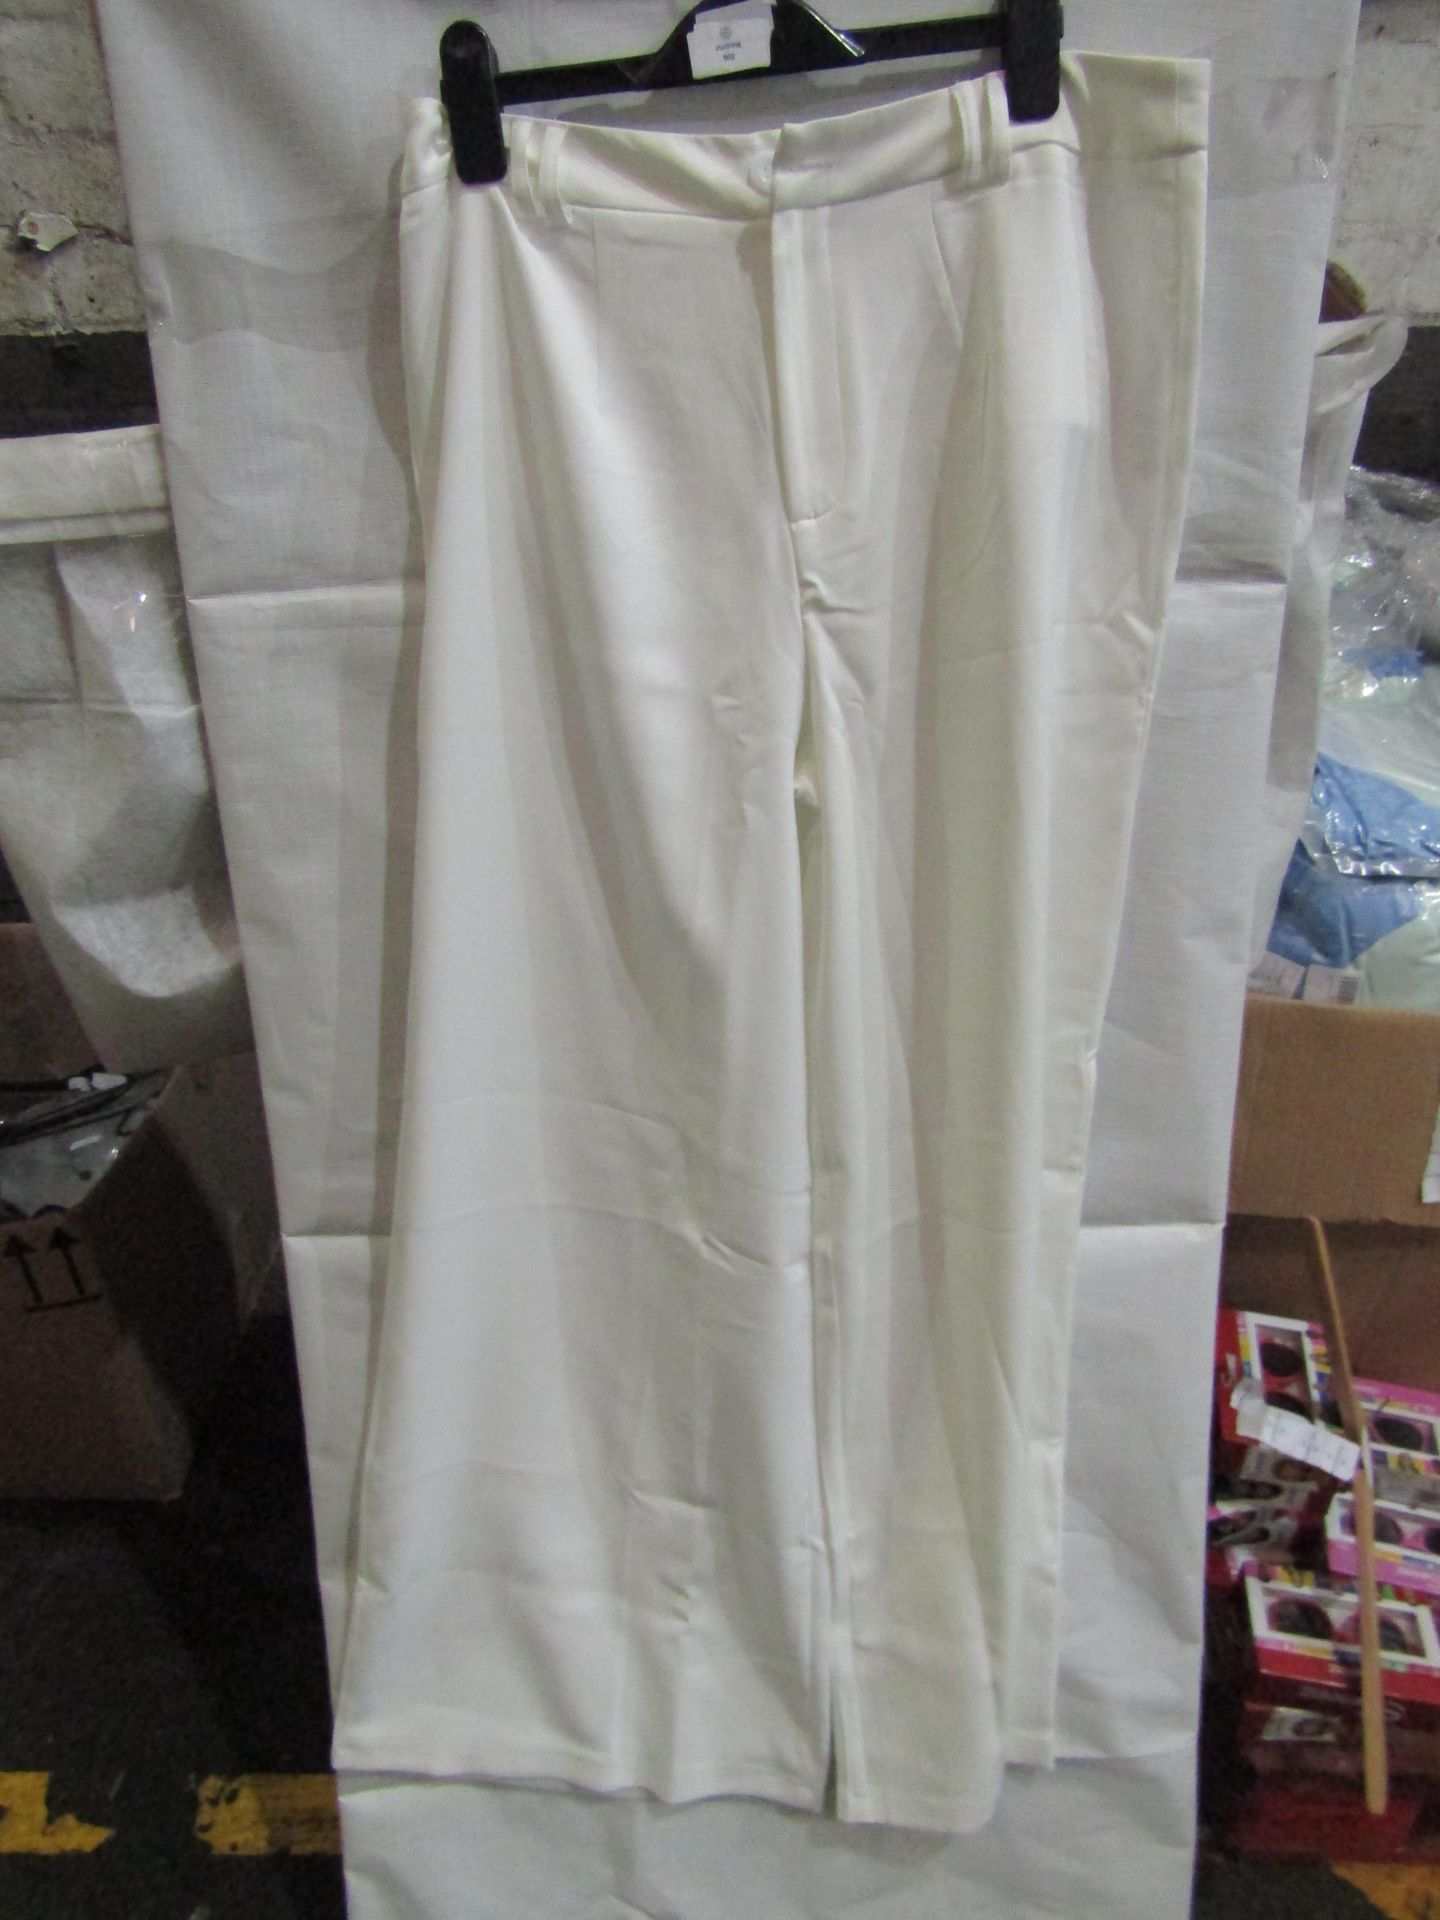 3 x PrettyLittleThing White Woven Double Belt Loop Suit Trousers, Size: 8 - New & Packaged.